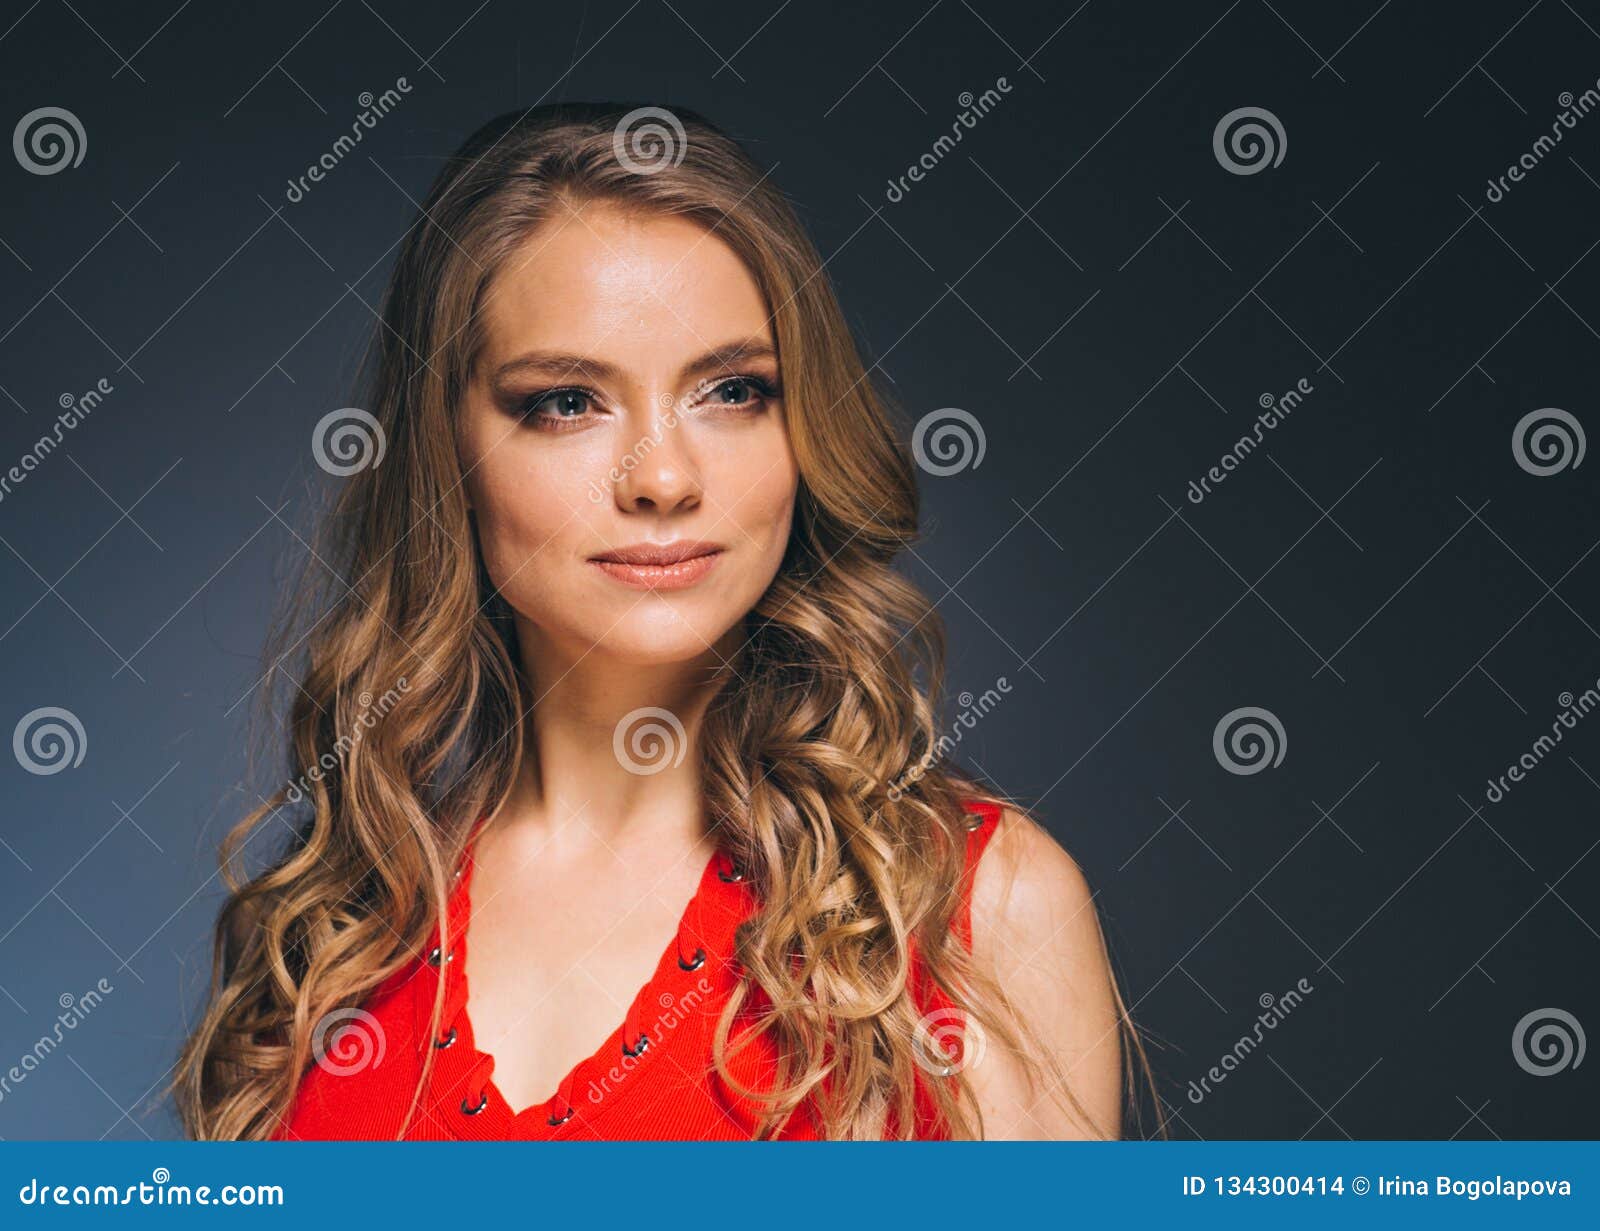 Woman in Red Dress with Long Blonde Hair Stock Photo - Image of long ...